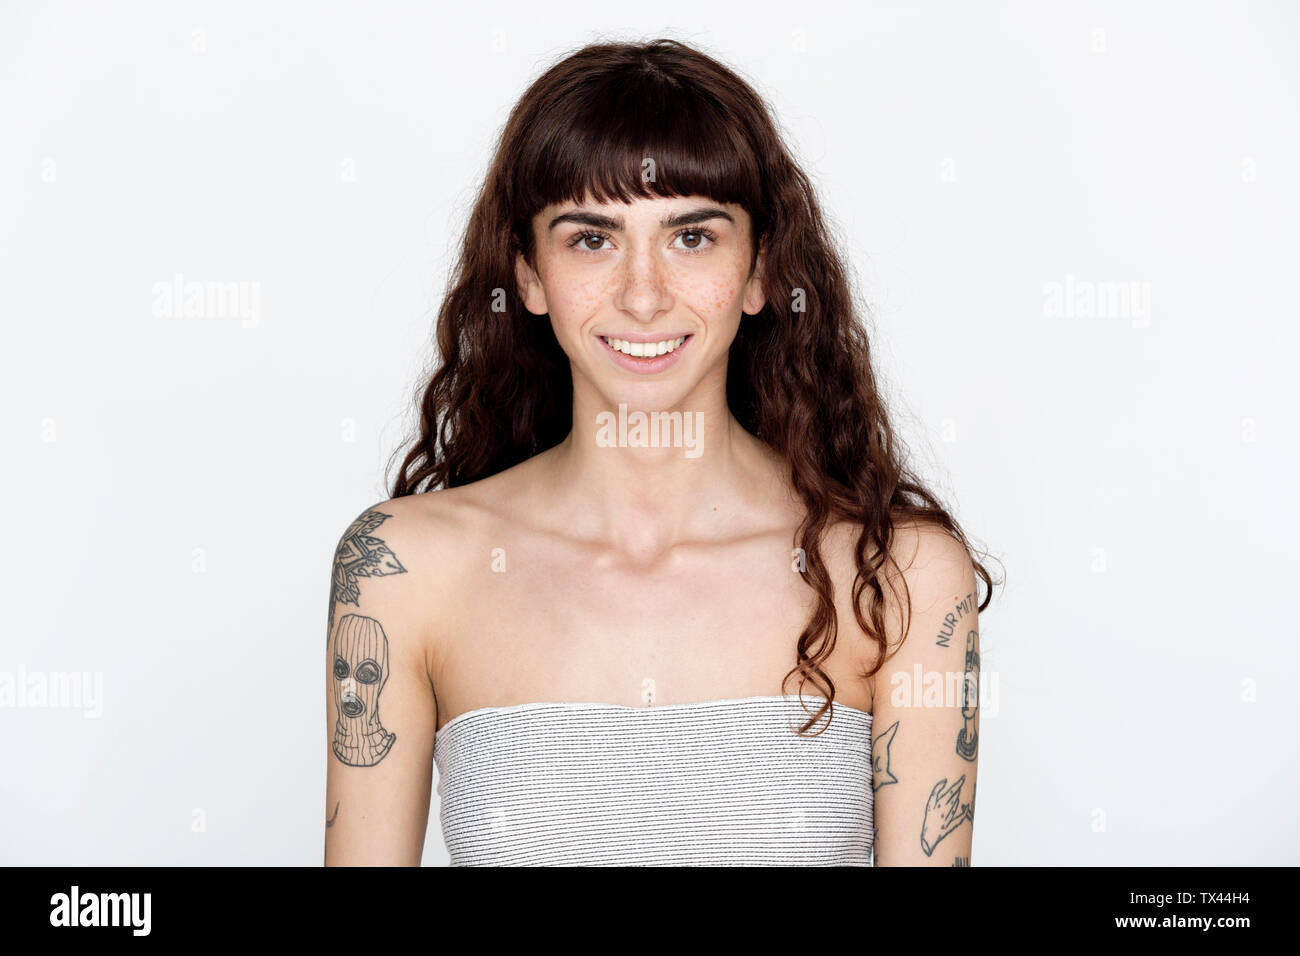 Portrait of smiling young woman with freckles and tattoos on her upper arms Stock Photo